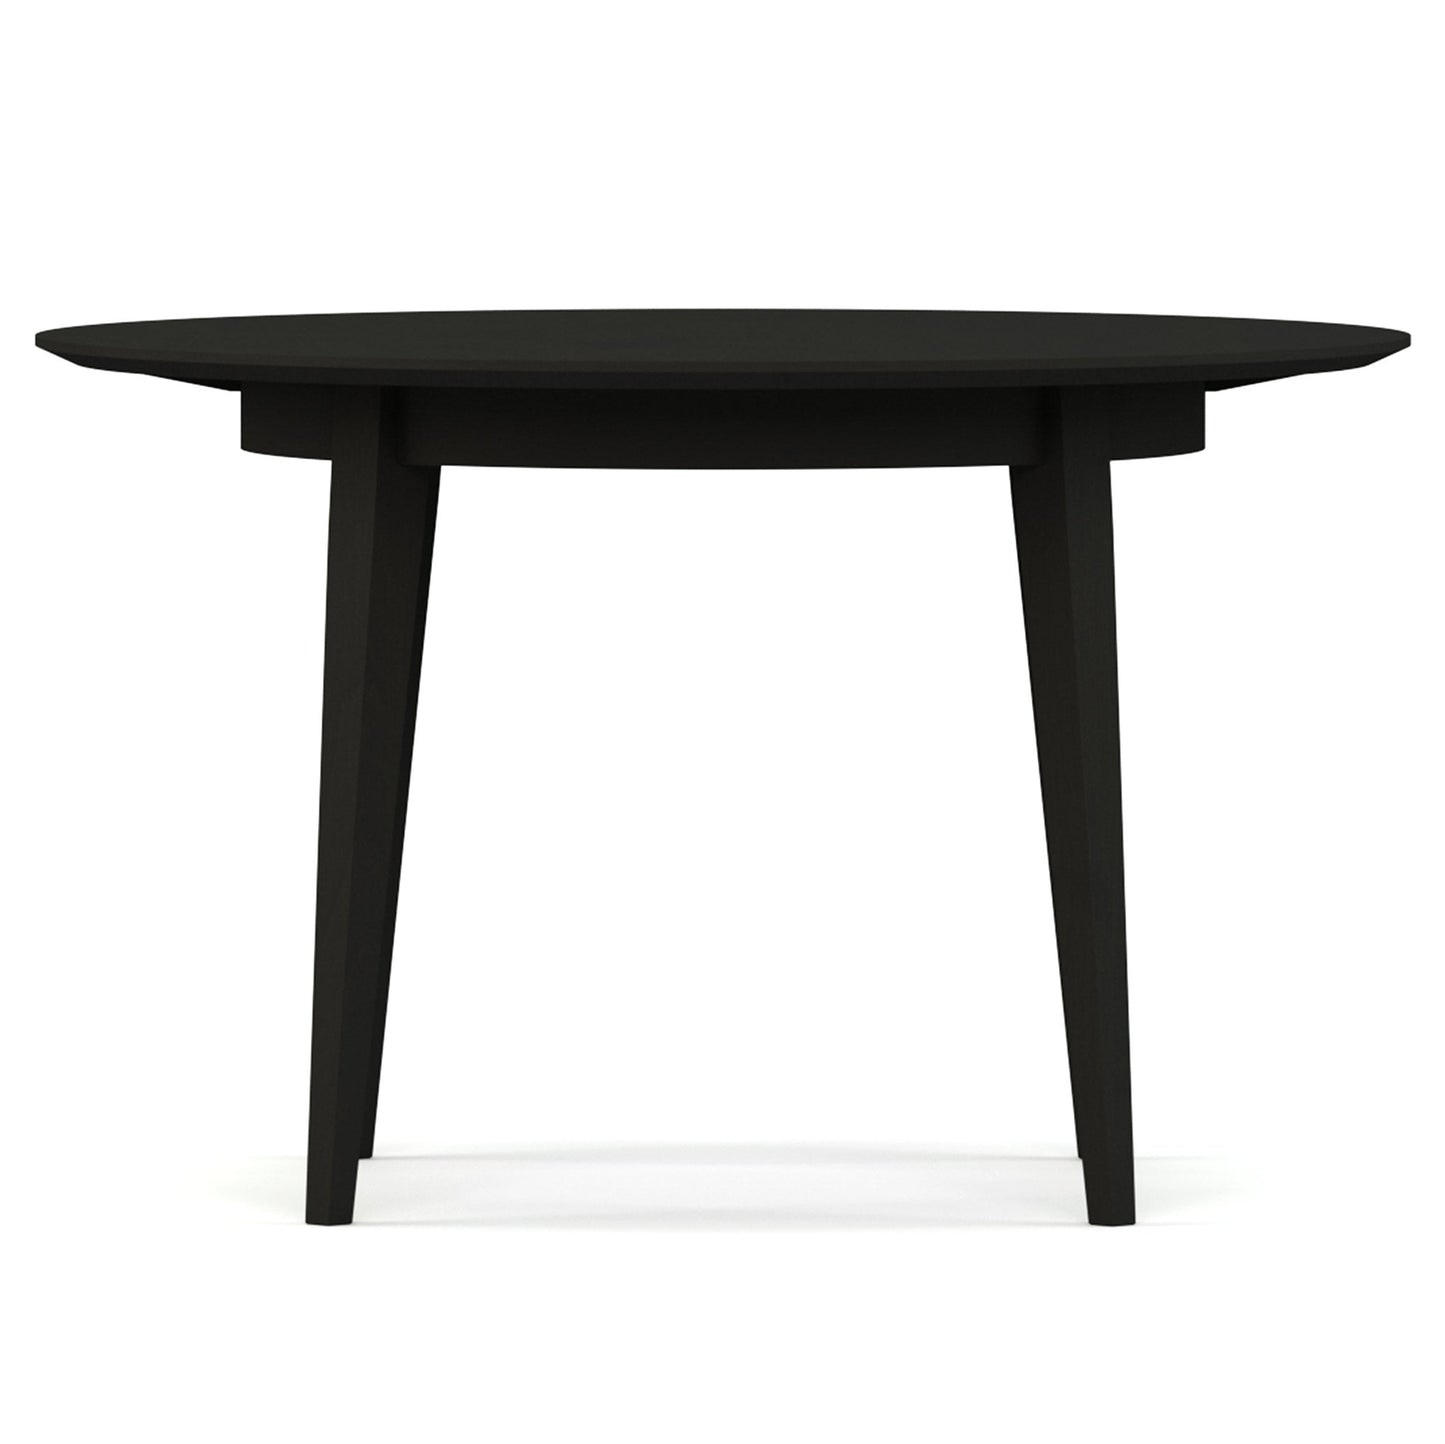 Gable Road 48-inch Round Dining Table